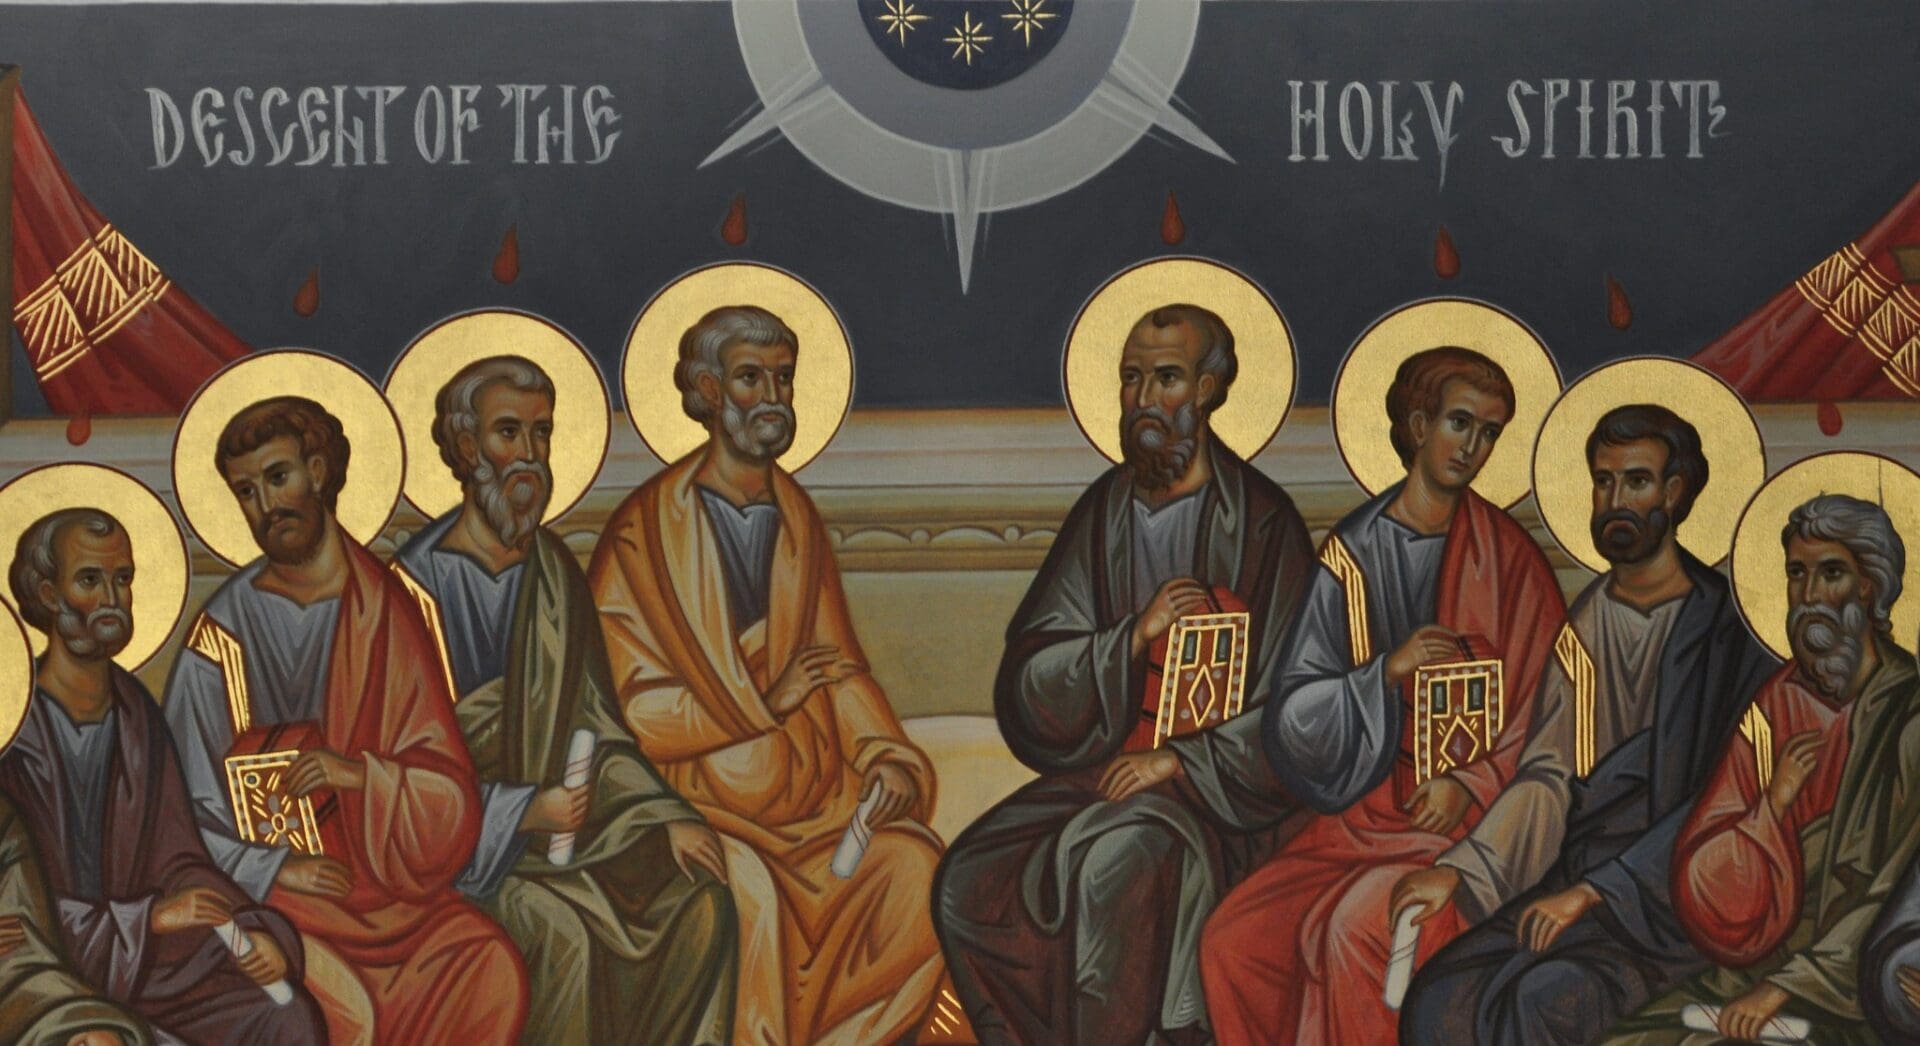 Pentecost: Potential Riches in an Impoverished Season – The Bookends of the Paschal Cycle, Part II